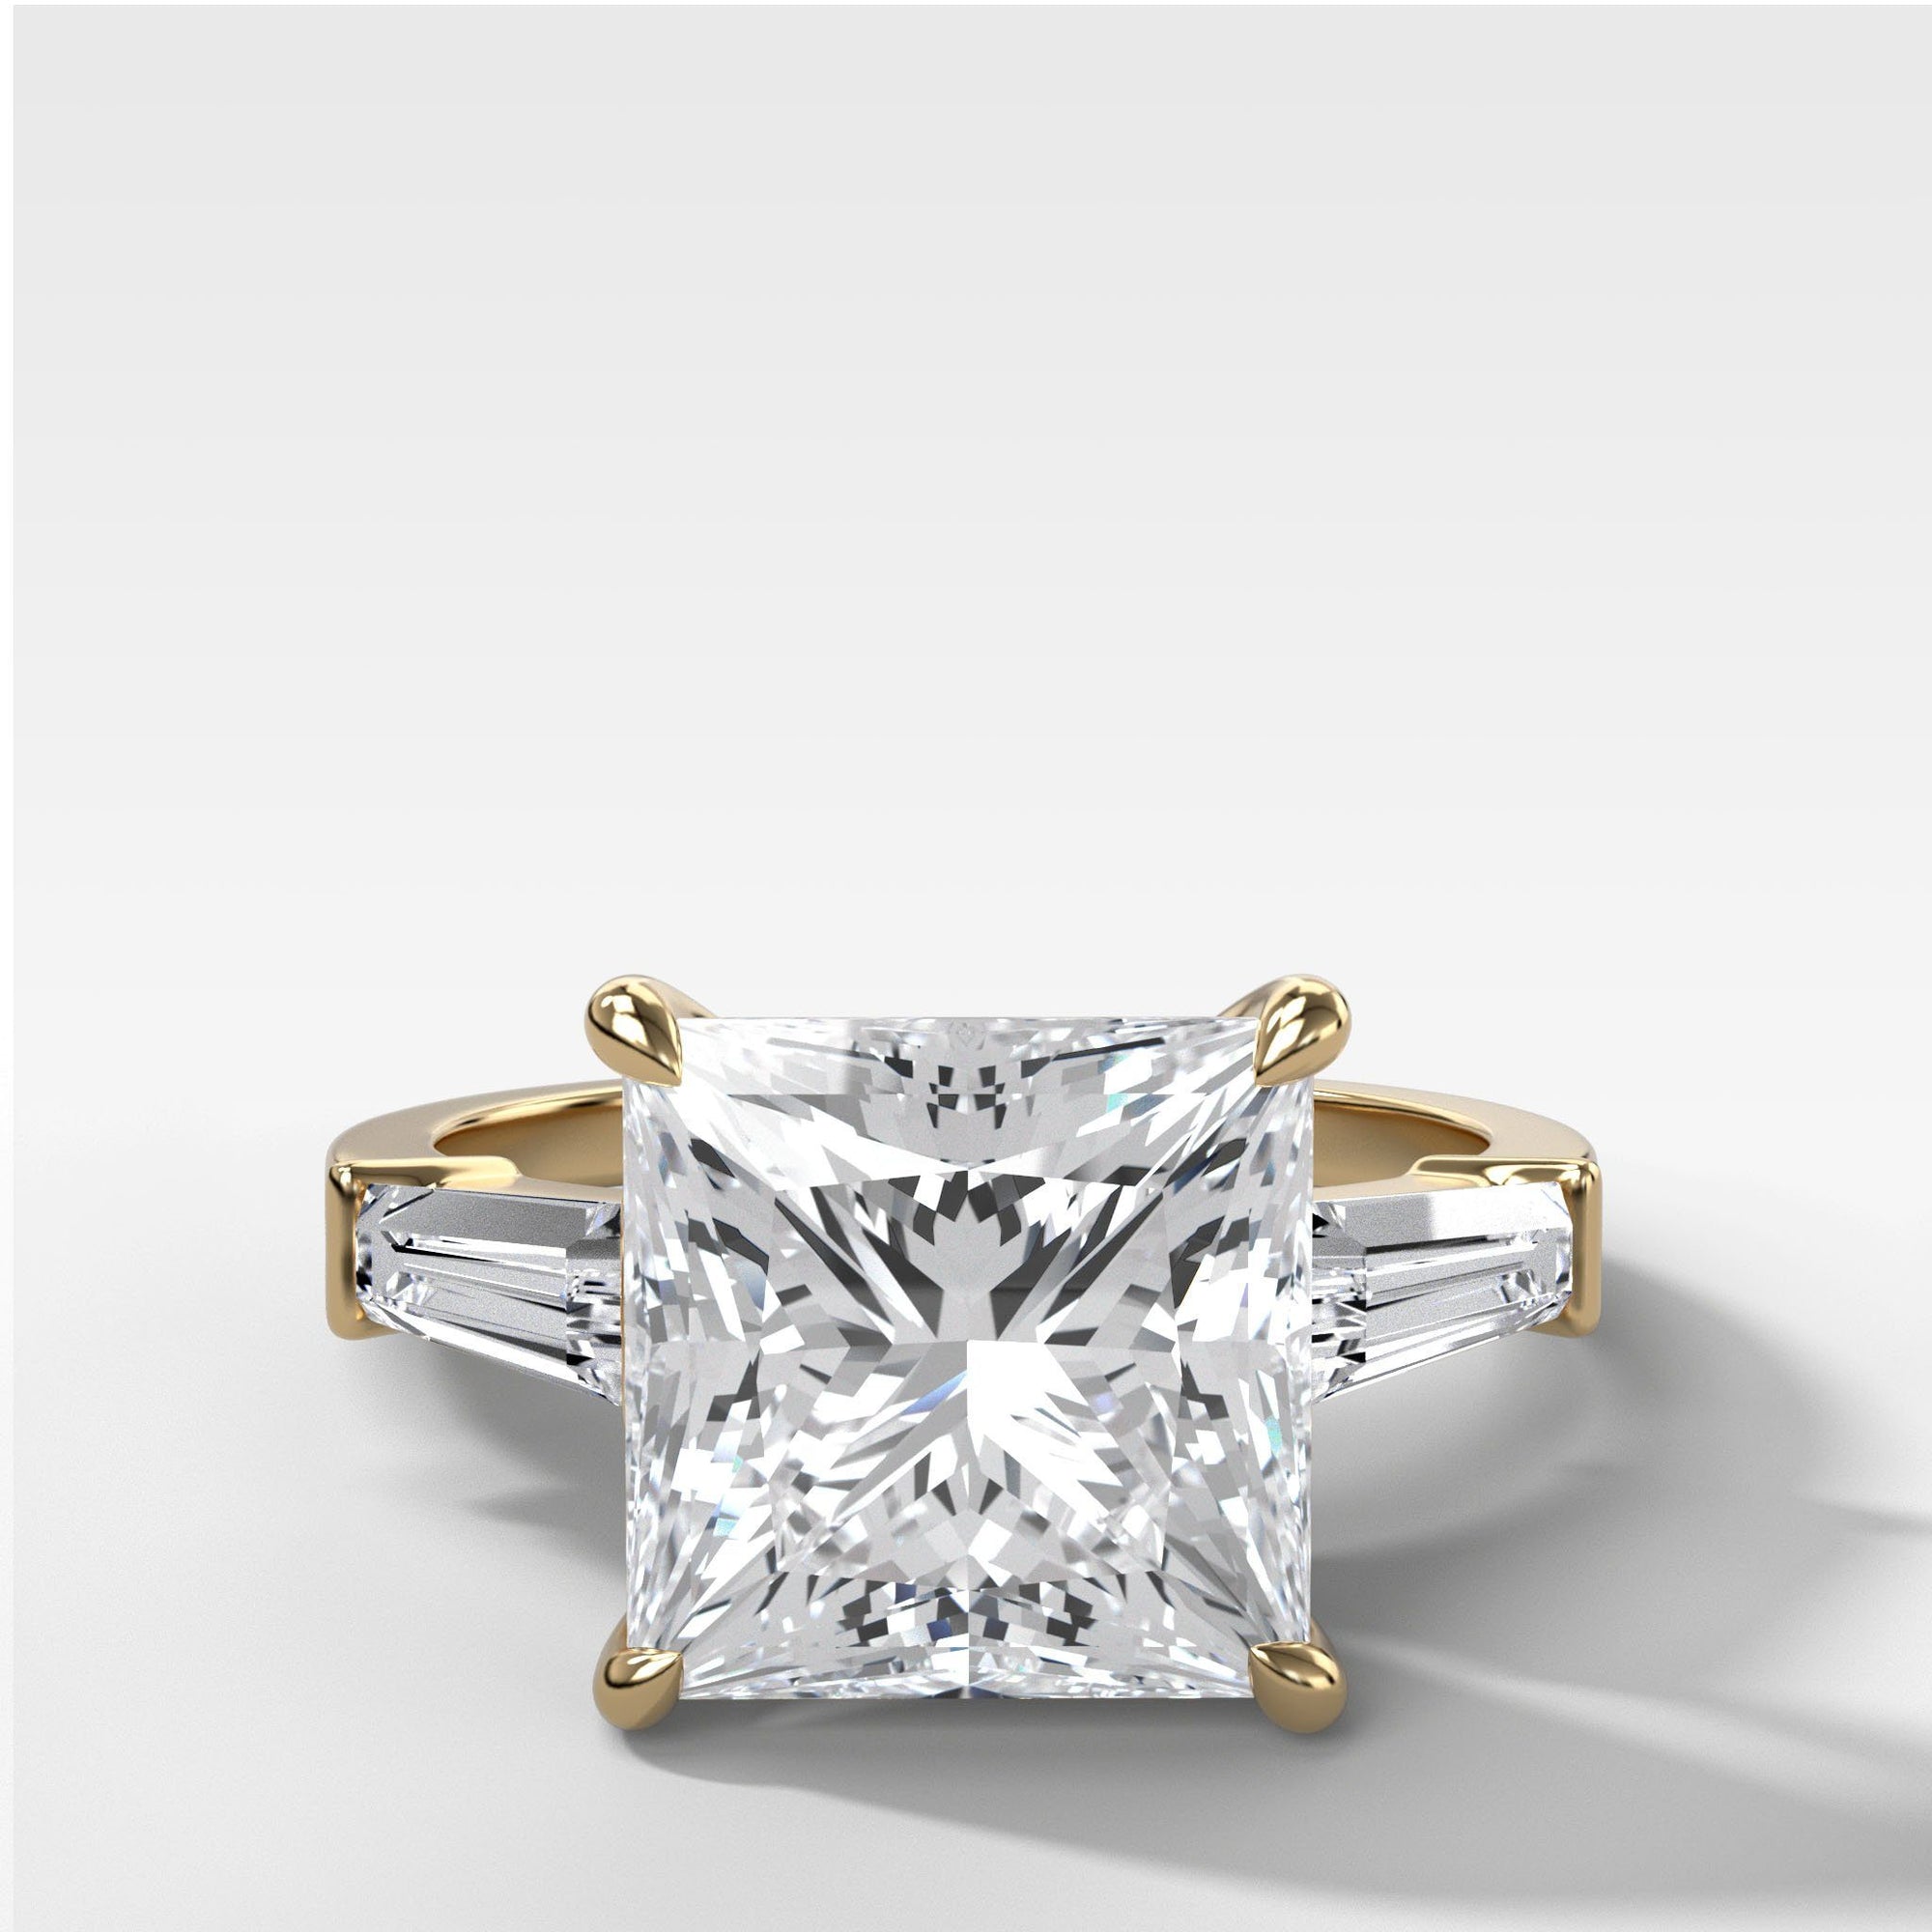 Translunar Tapered Baguette Engagement Ring With Princess Cut by Good Stone in Yellow Gold